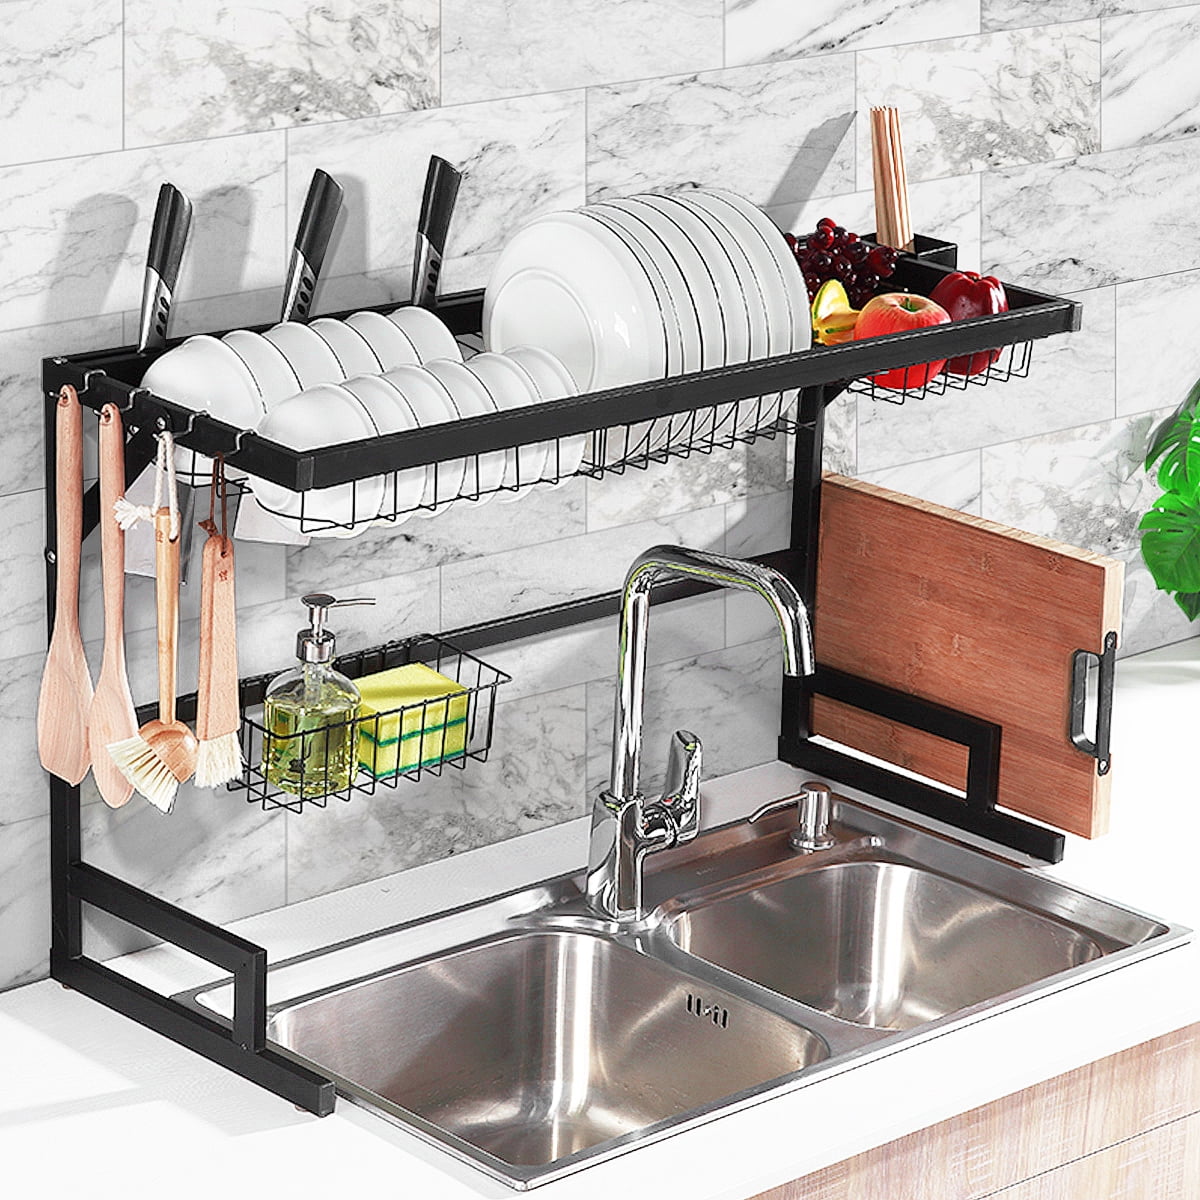 2-Tier Sink Rack Dish Drainer Kitchen Sink Rack Storage Rack, Over The Over The Sink Stainless Steel Dish Rack